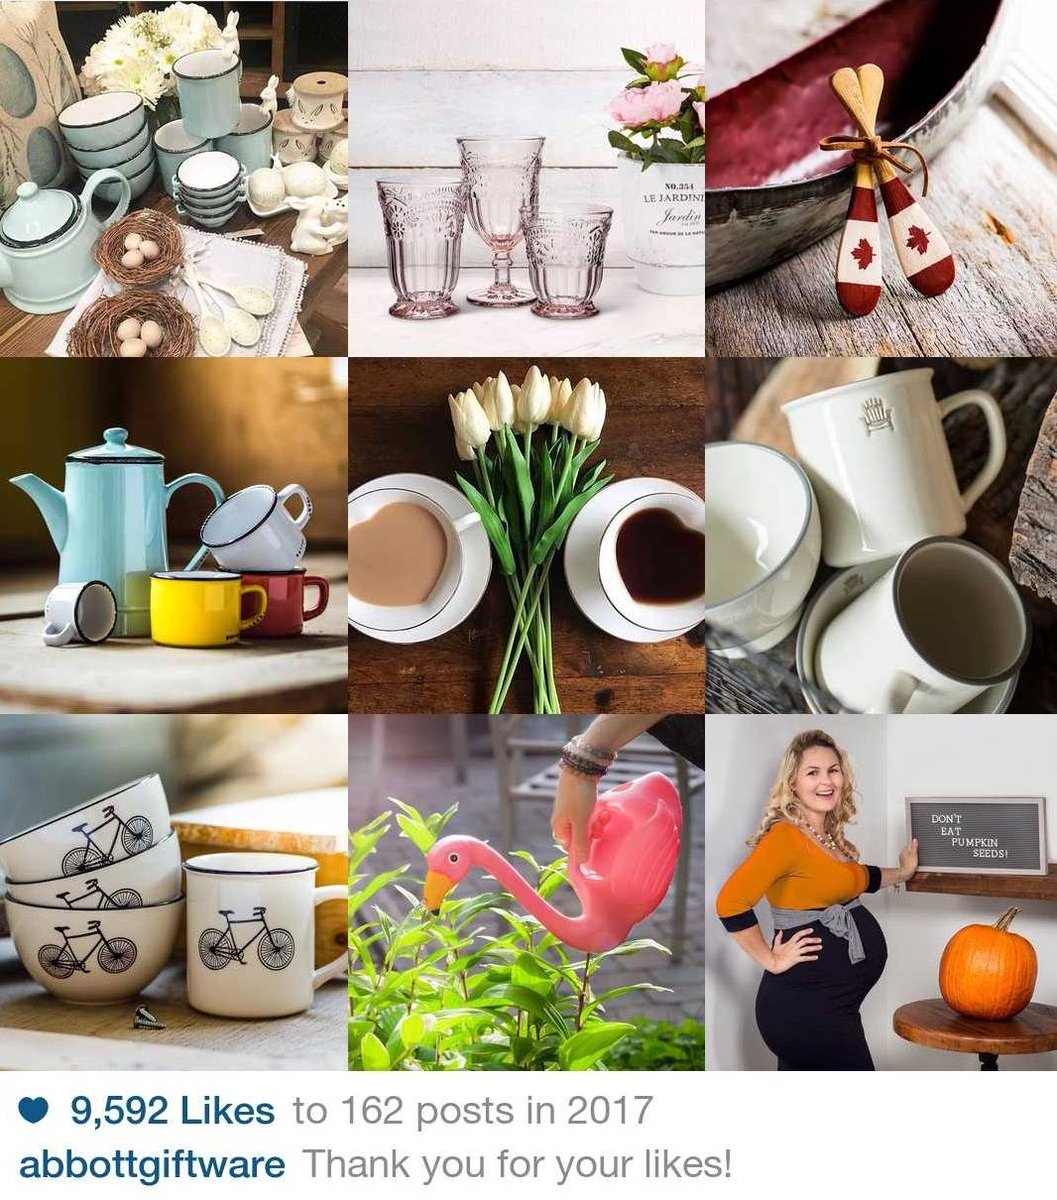 Thank all you for a fantastic 2017... Now to new and exciting things in 2018! 
#abbottcollection #abbottgiftware #thankyou #goodbye2017 #hello2018 #homedecor #homehappiness #newbeginning #2017bestnine